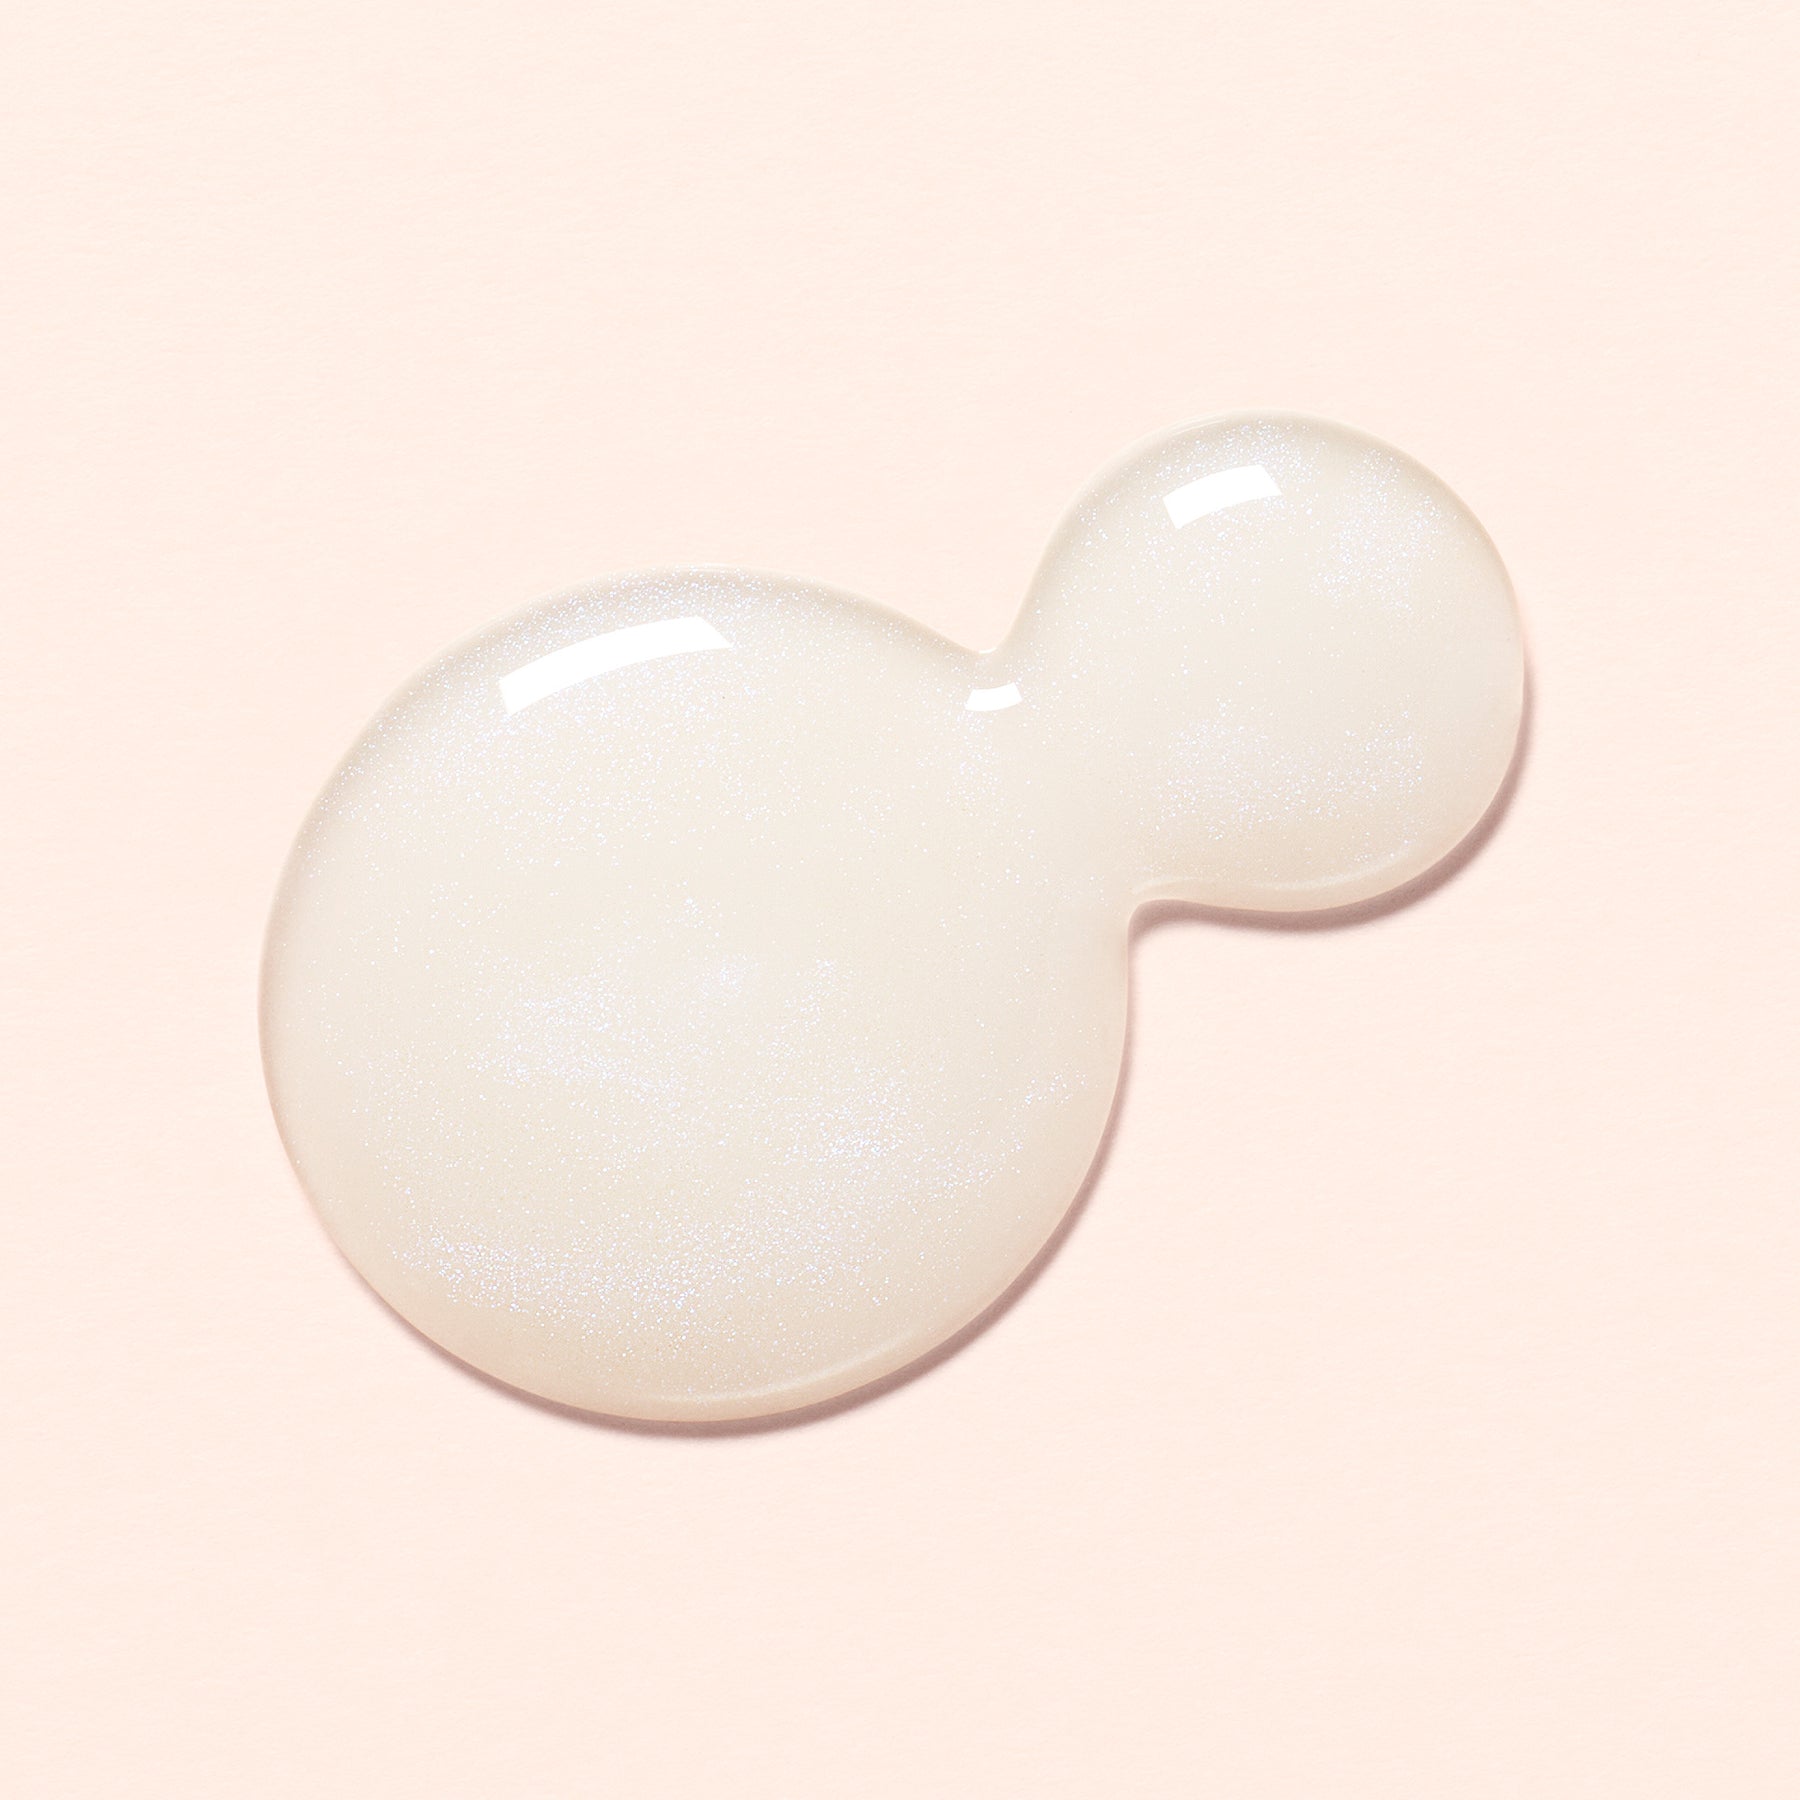 A dollop of the Active Bright - a milky opal color - nail polish on a light peach background.